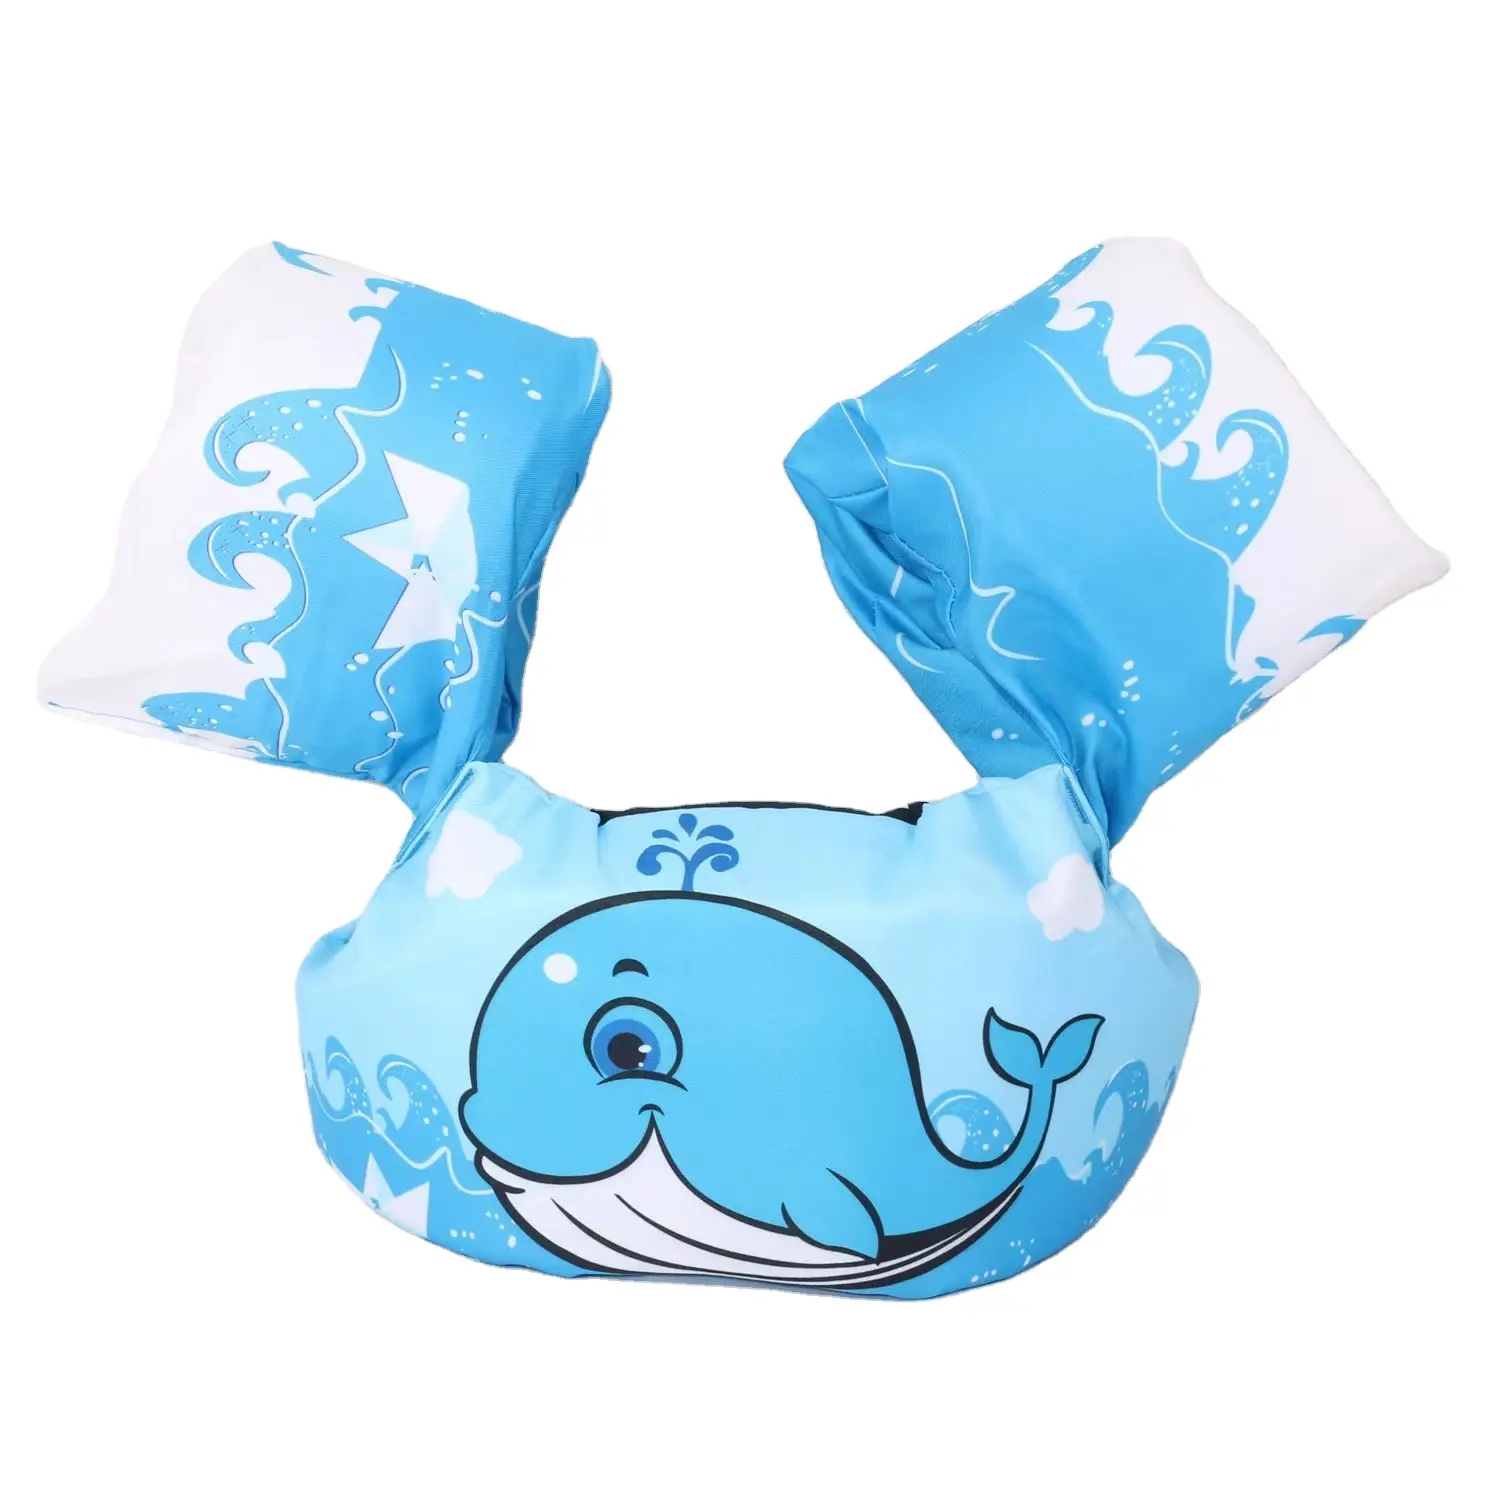 Inflatable Kids Arm Bands Floatation Water Sleeves Floats Tube Water Wings Swimming Arm Floats